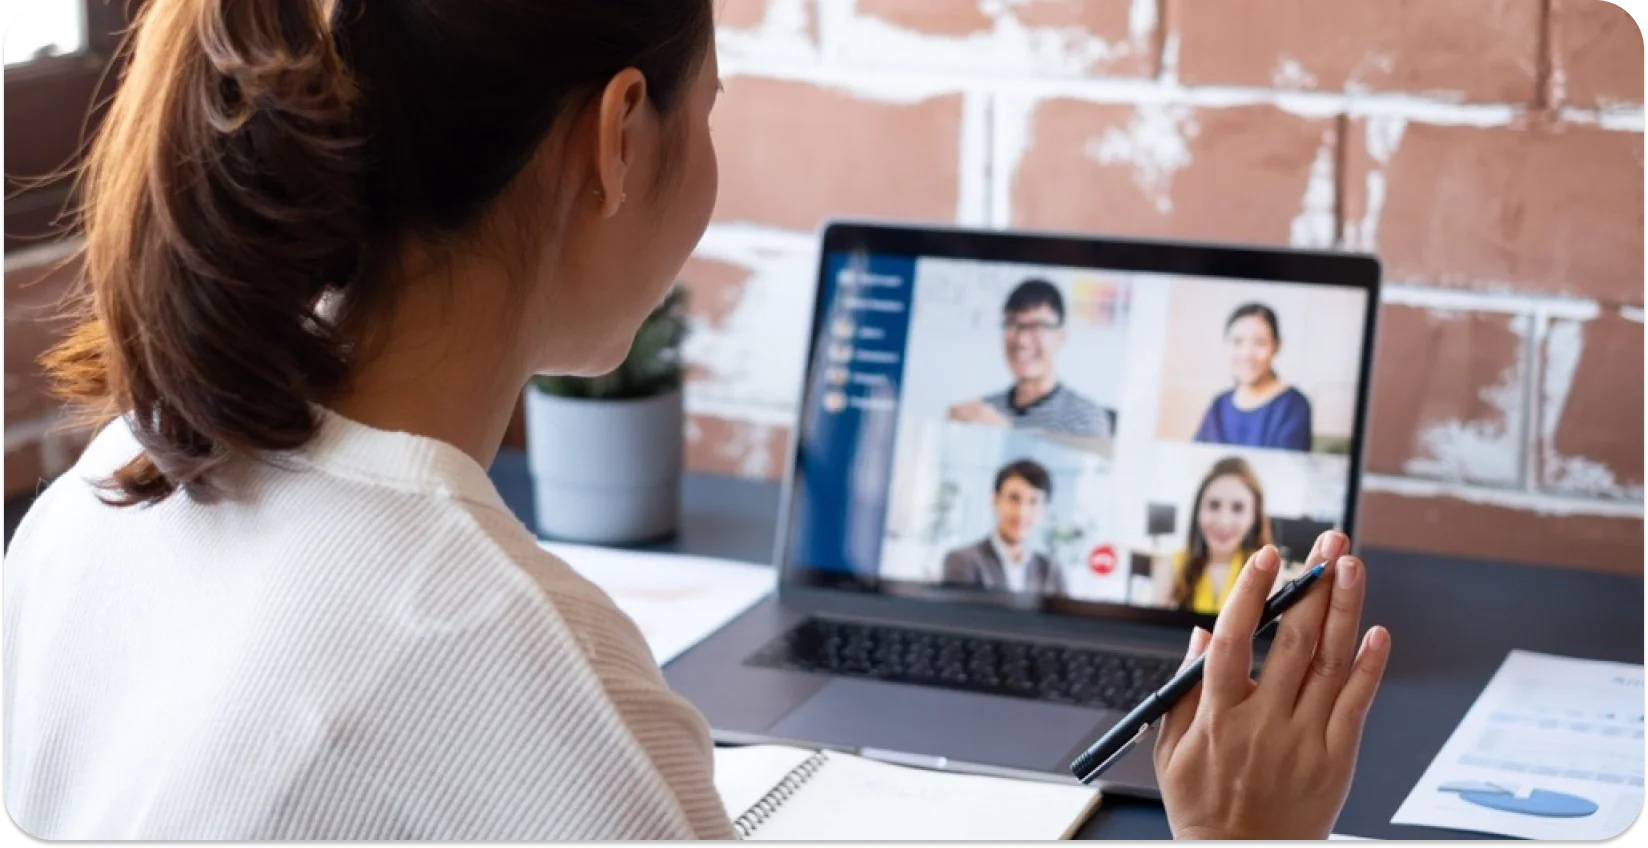 Professional engaging in a virtual meeting with colleagues on a laptop screen.